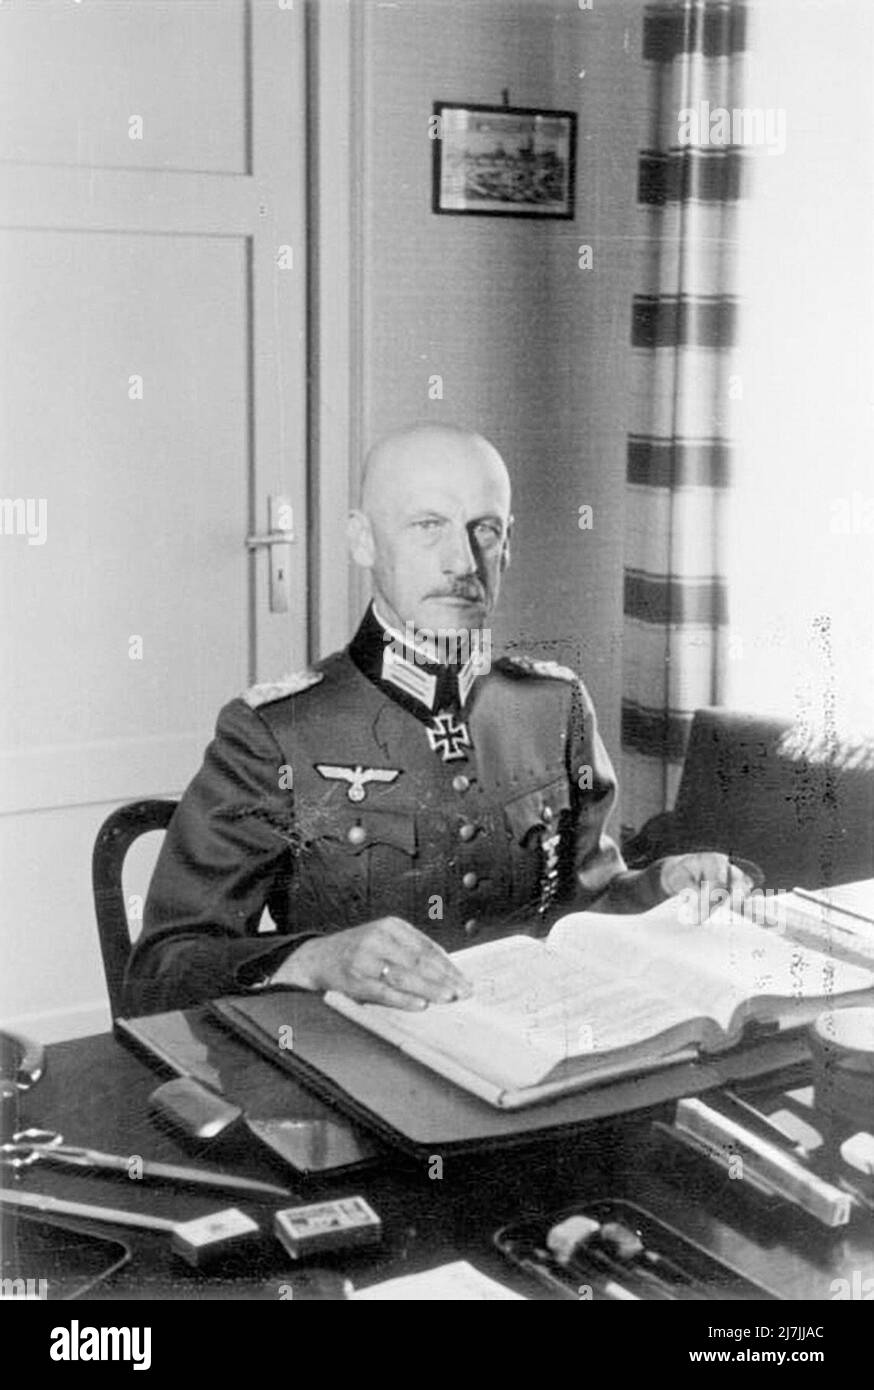 Wilhelm Josef Franz Ritter von Leeb was a German field marshal in World War II. In the Invasion of France, he commanded Army Group C, responsible for the breakthrough of the Maginot Line.  During Operation Barbarossa—the invasion of the Soviet Union—Leeb commanded Army Group North, eventually laying siege to the city. Units under Leeb’s command committed war crimes against the civilian population and closely cooperated with the SS Einsatzgruppen, death squads primarily tasked with the murder of the Jewish population as part of the Holocaust. Stock Photo